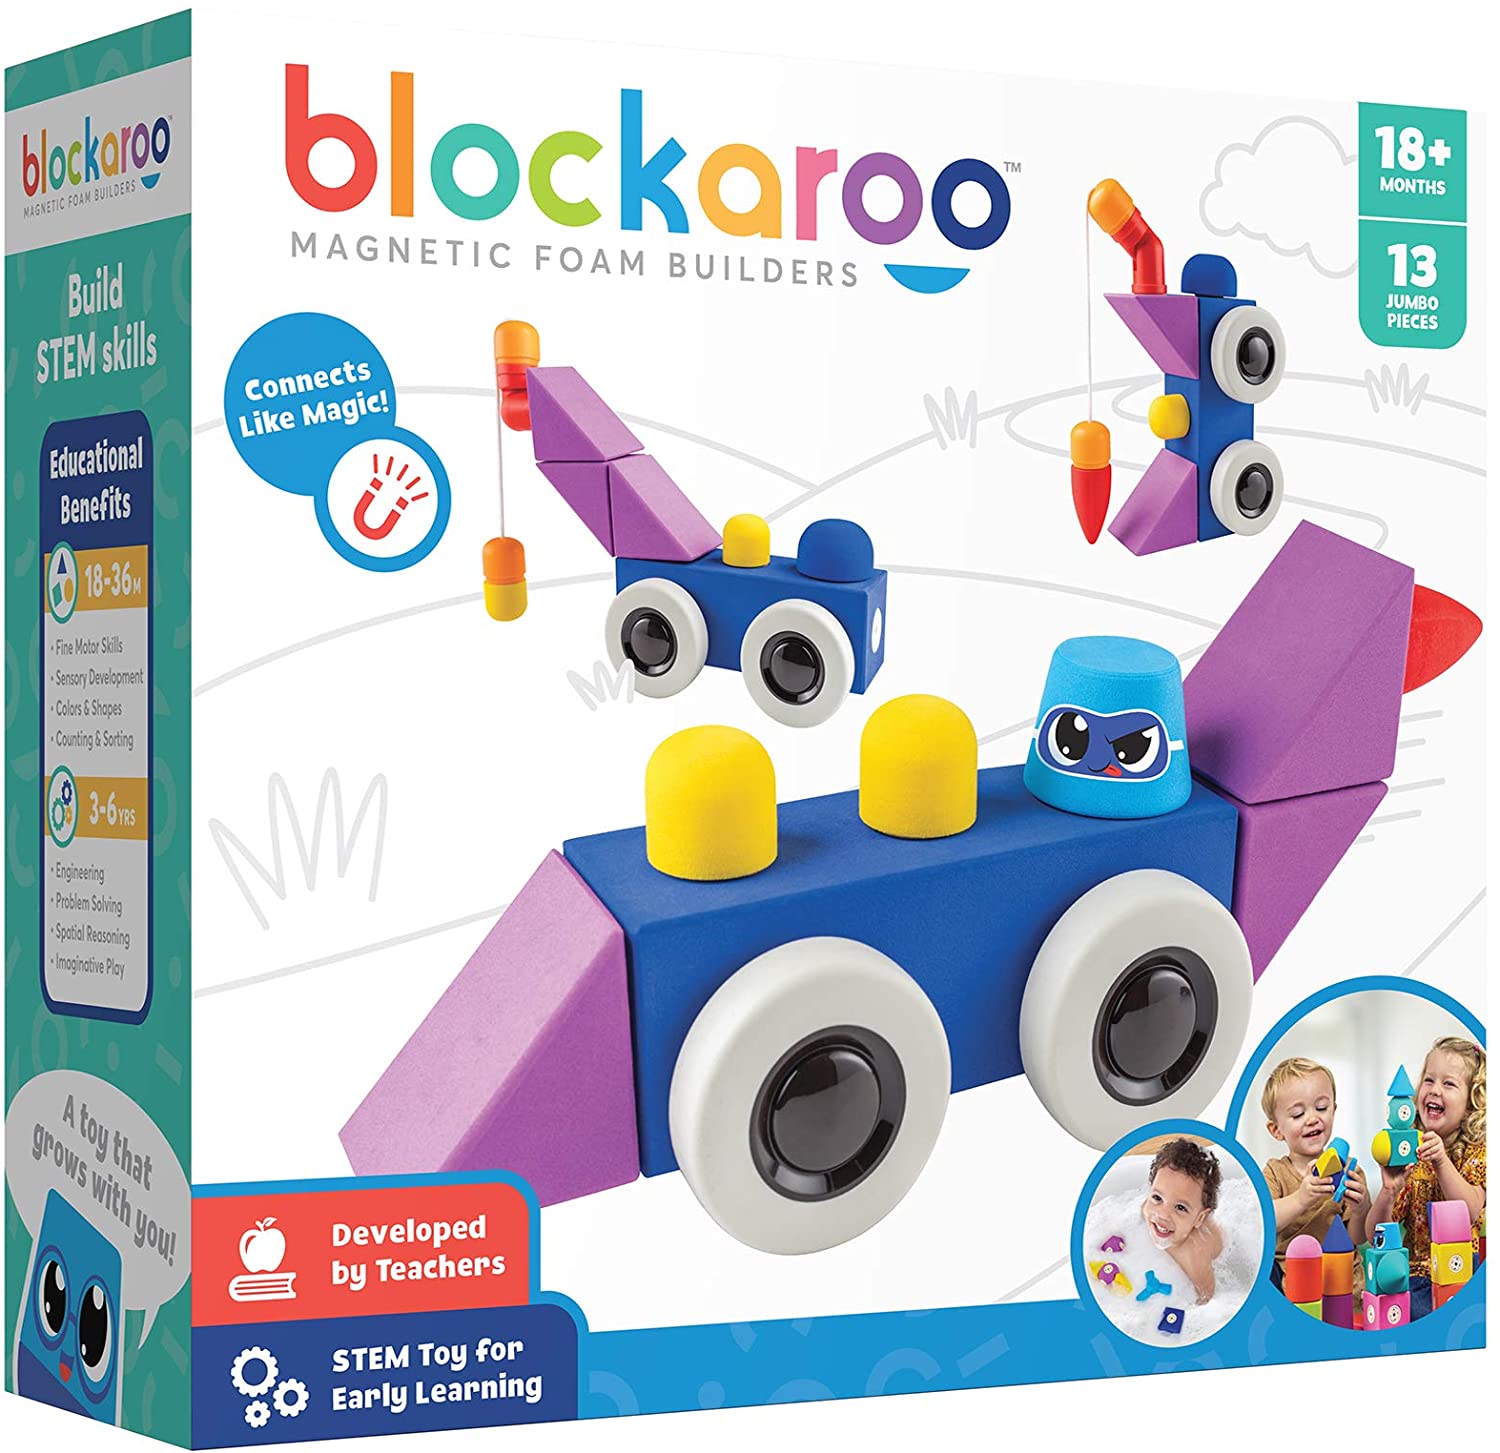 A white box says "blockaroo" and depicts different vehicles in bright colors that are built from soft, magnetic blocks